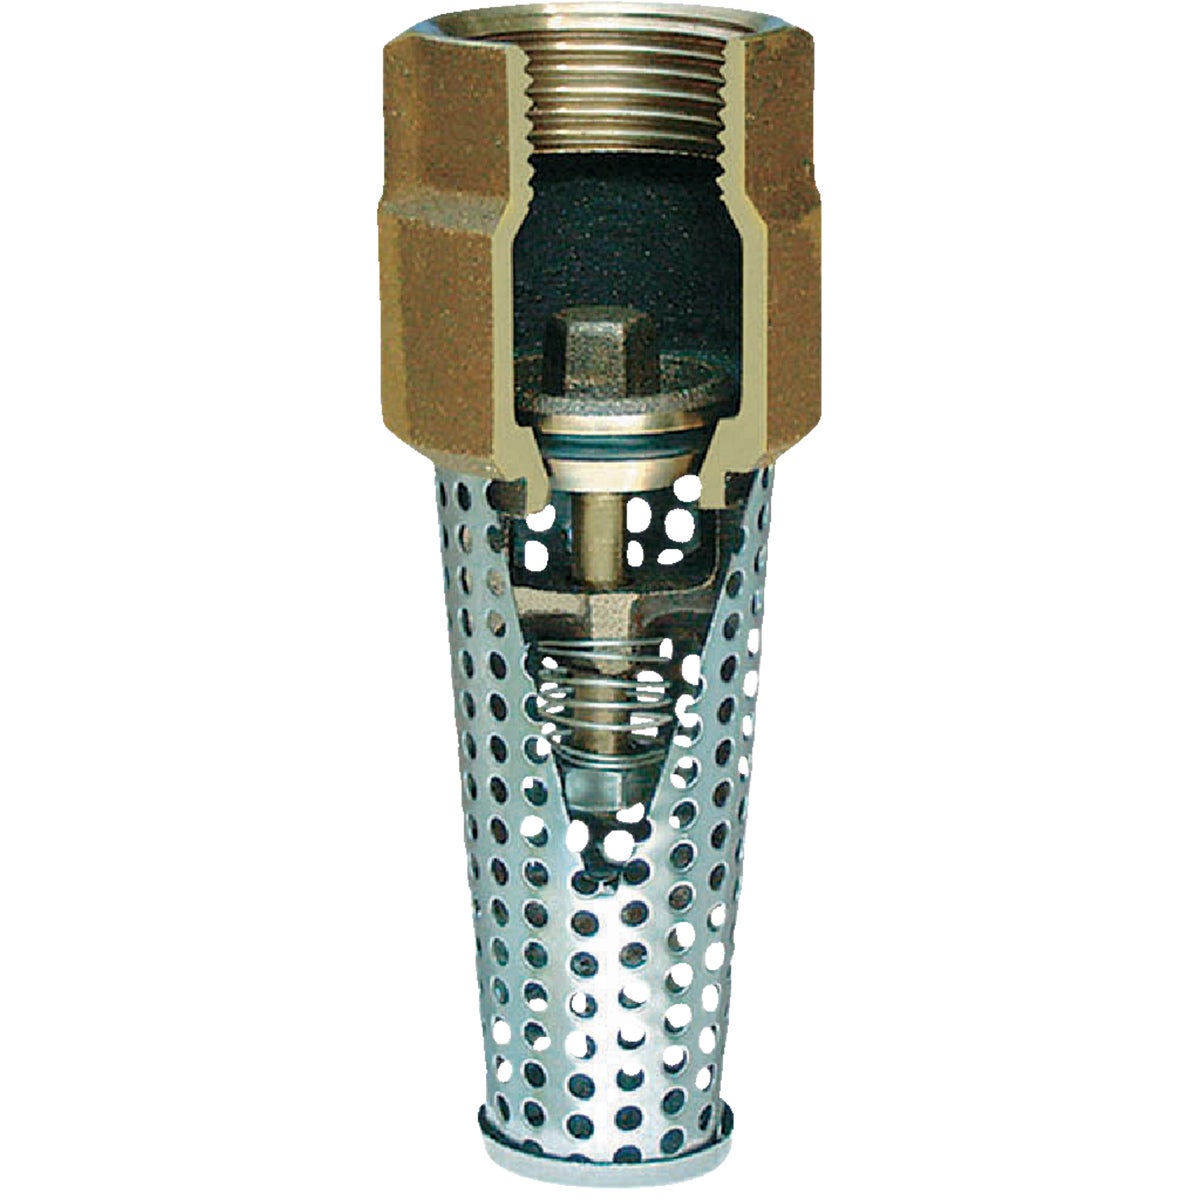 Simmons 2 In. Silicon Bronze Foot Valve, Lead Free